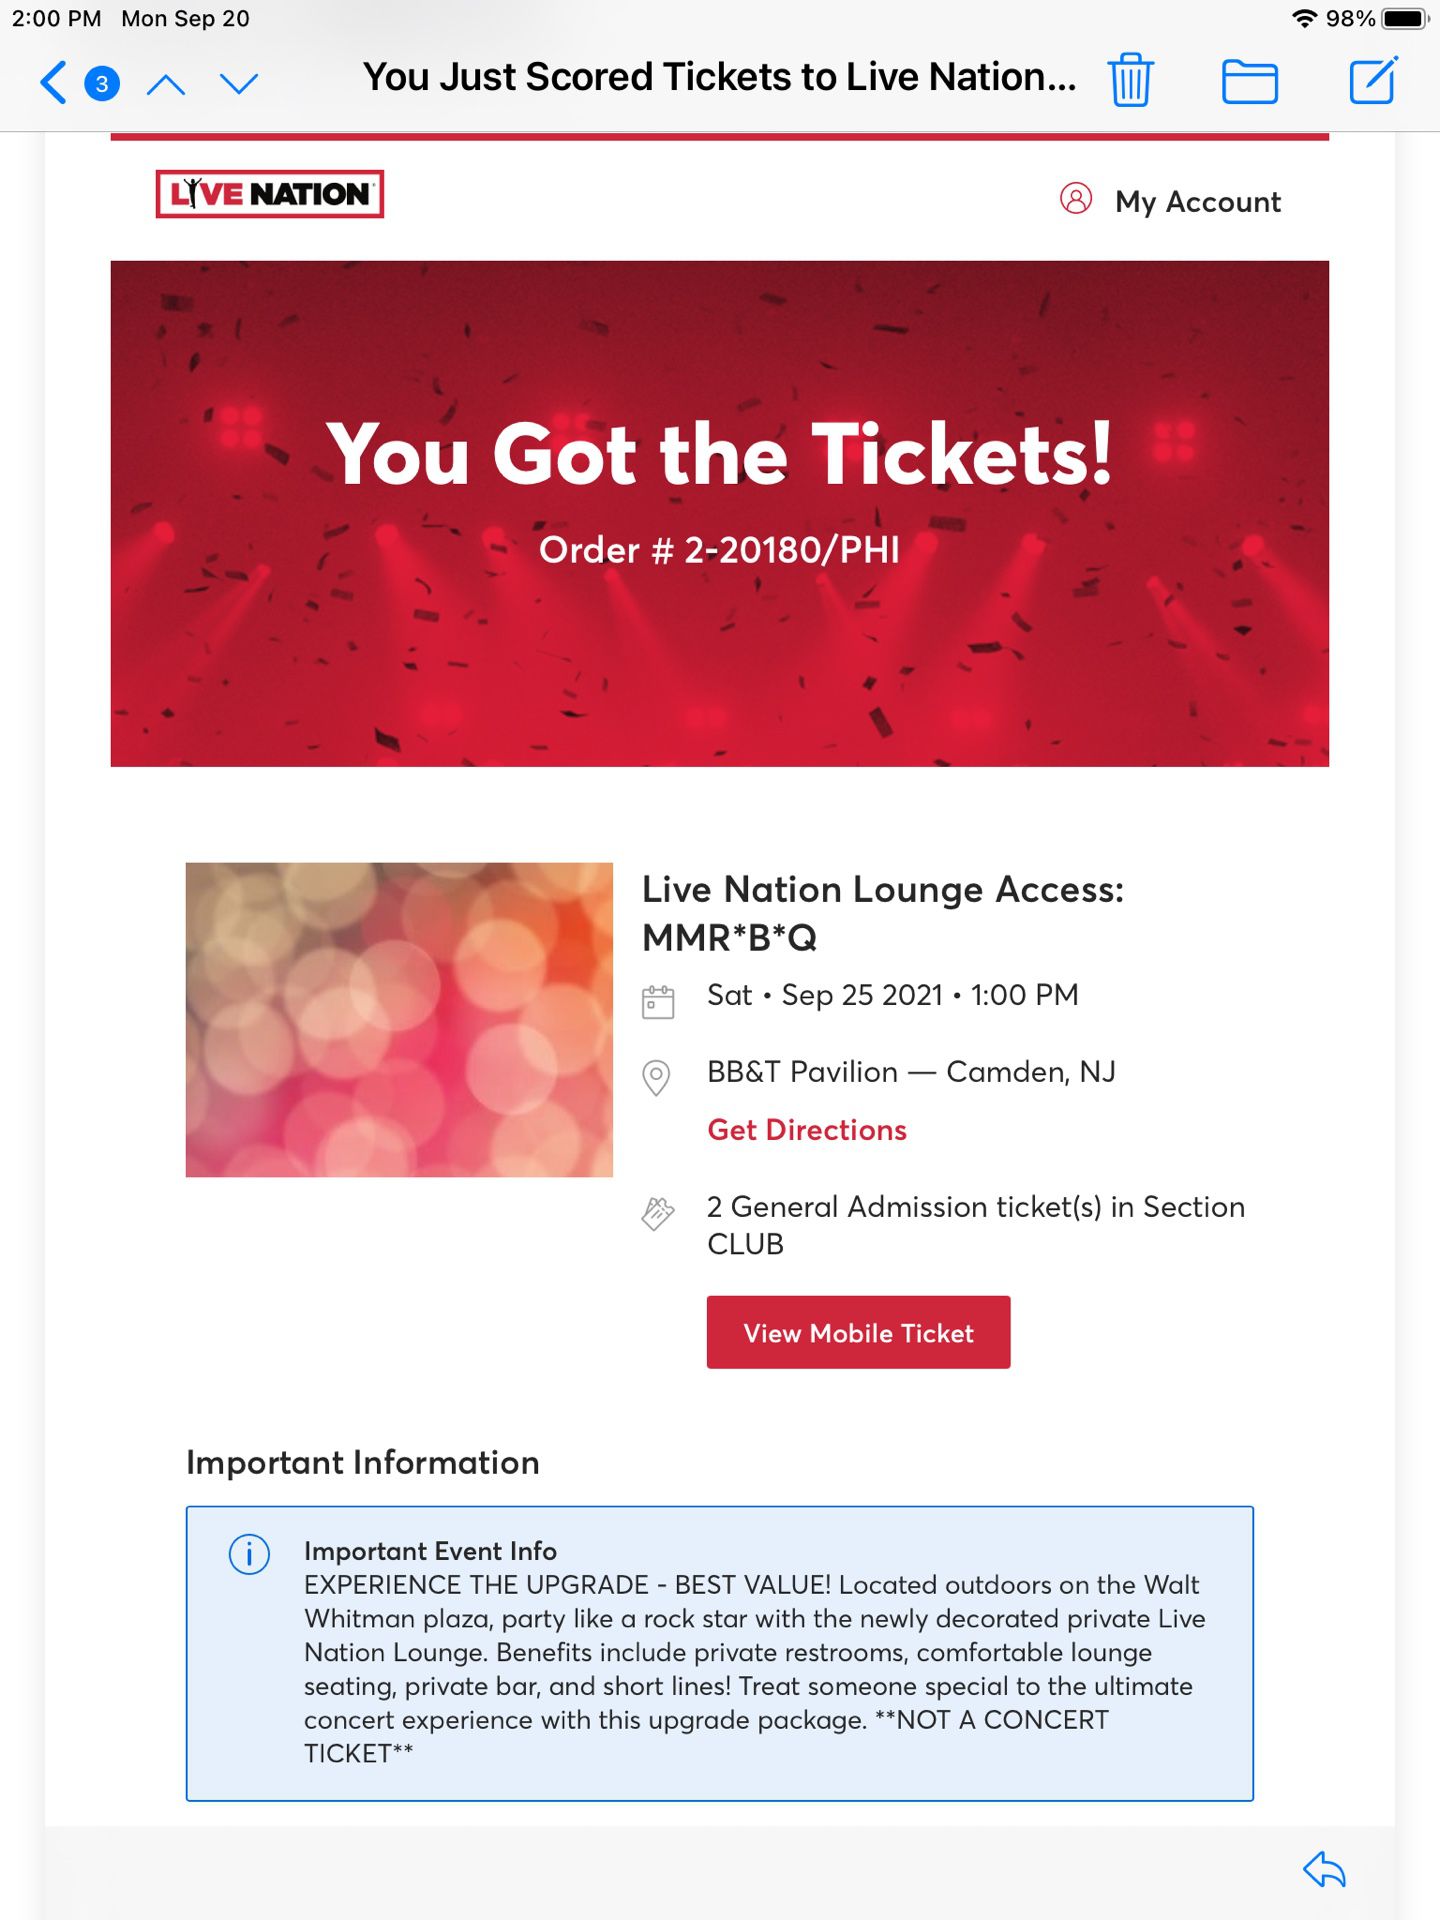 MMRBQ Jane’s Addiction 2 Pit Tickets & 2 Sold Out  Live Nation Lounge Tickets  All 4 Tickets 9/24/21